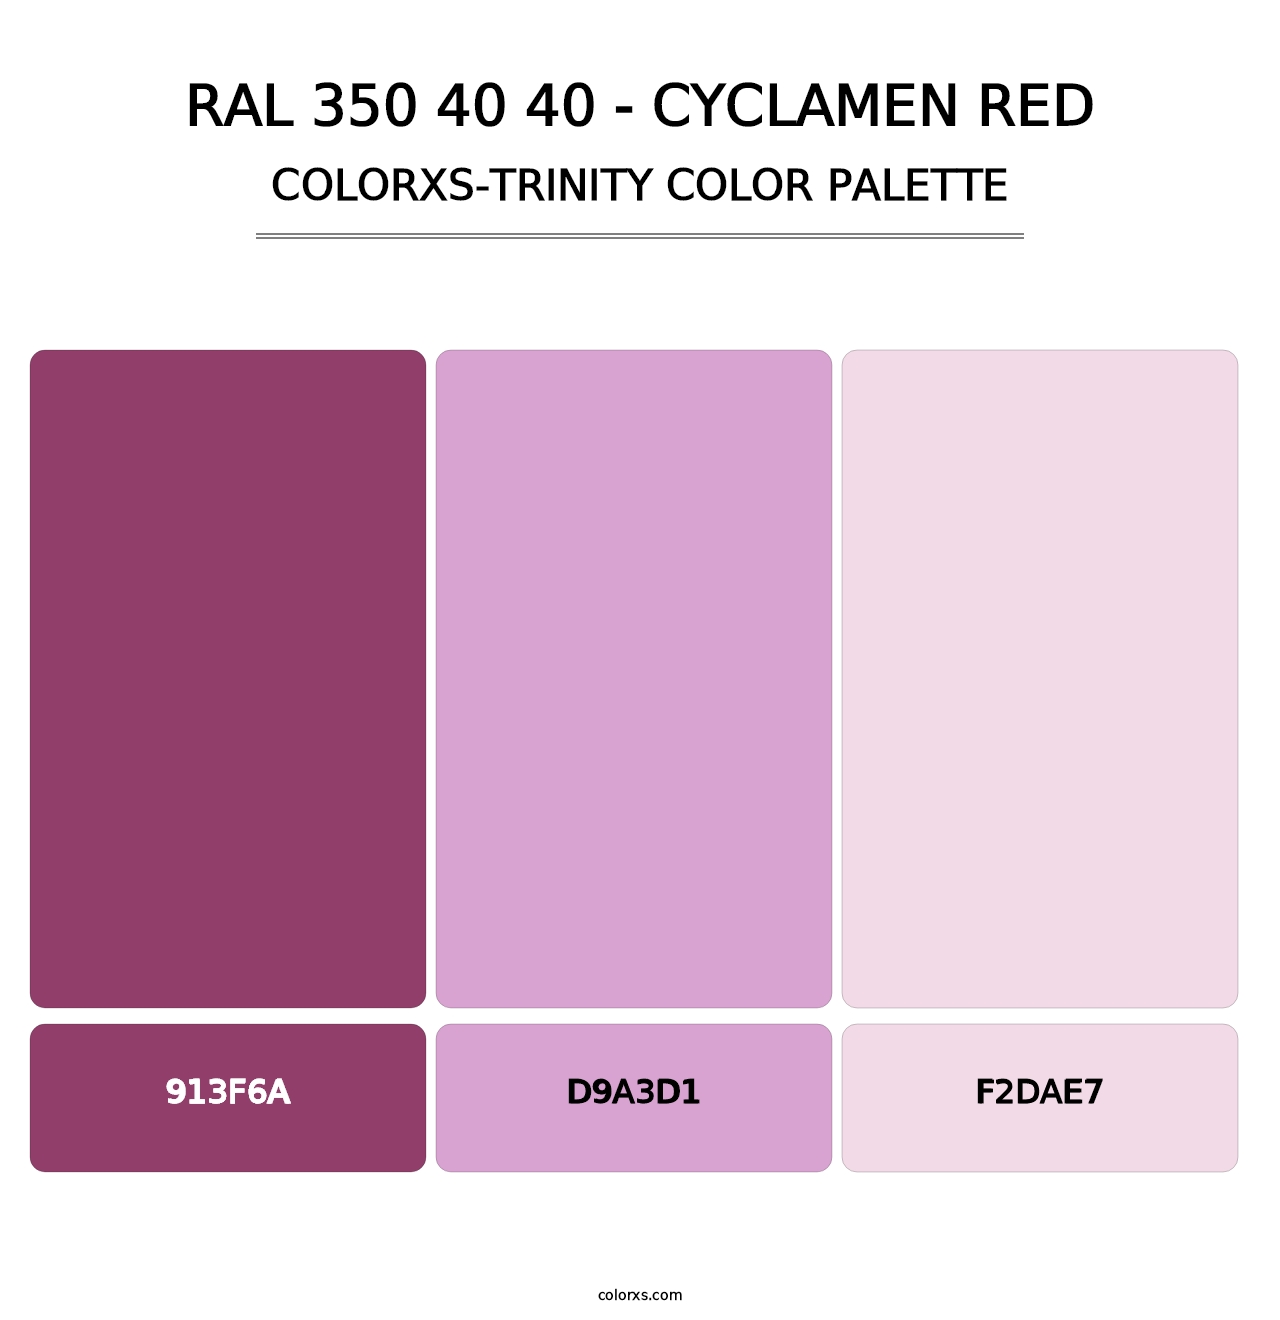 RAL 350 40 40 - Cyclamen Red - Colorxs Trinity Palette